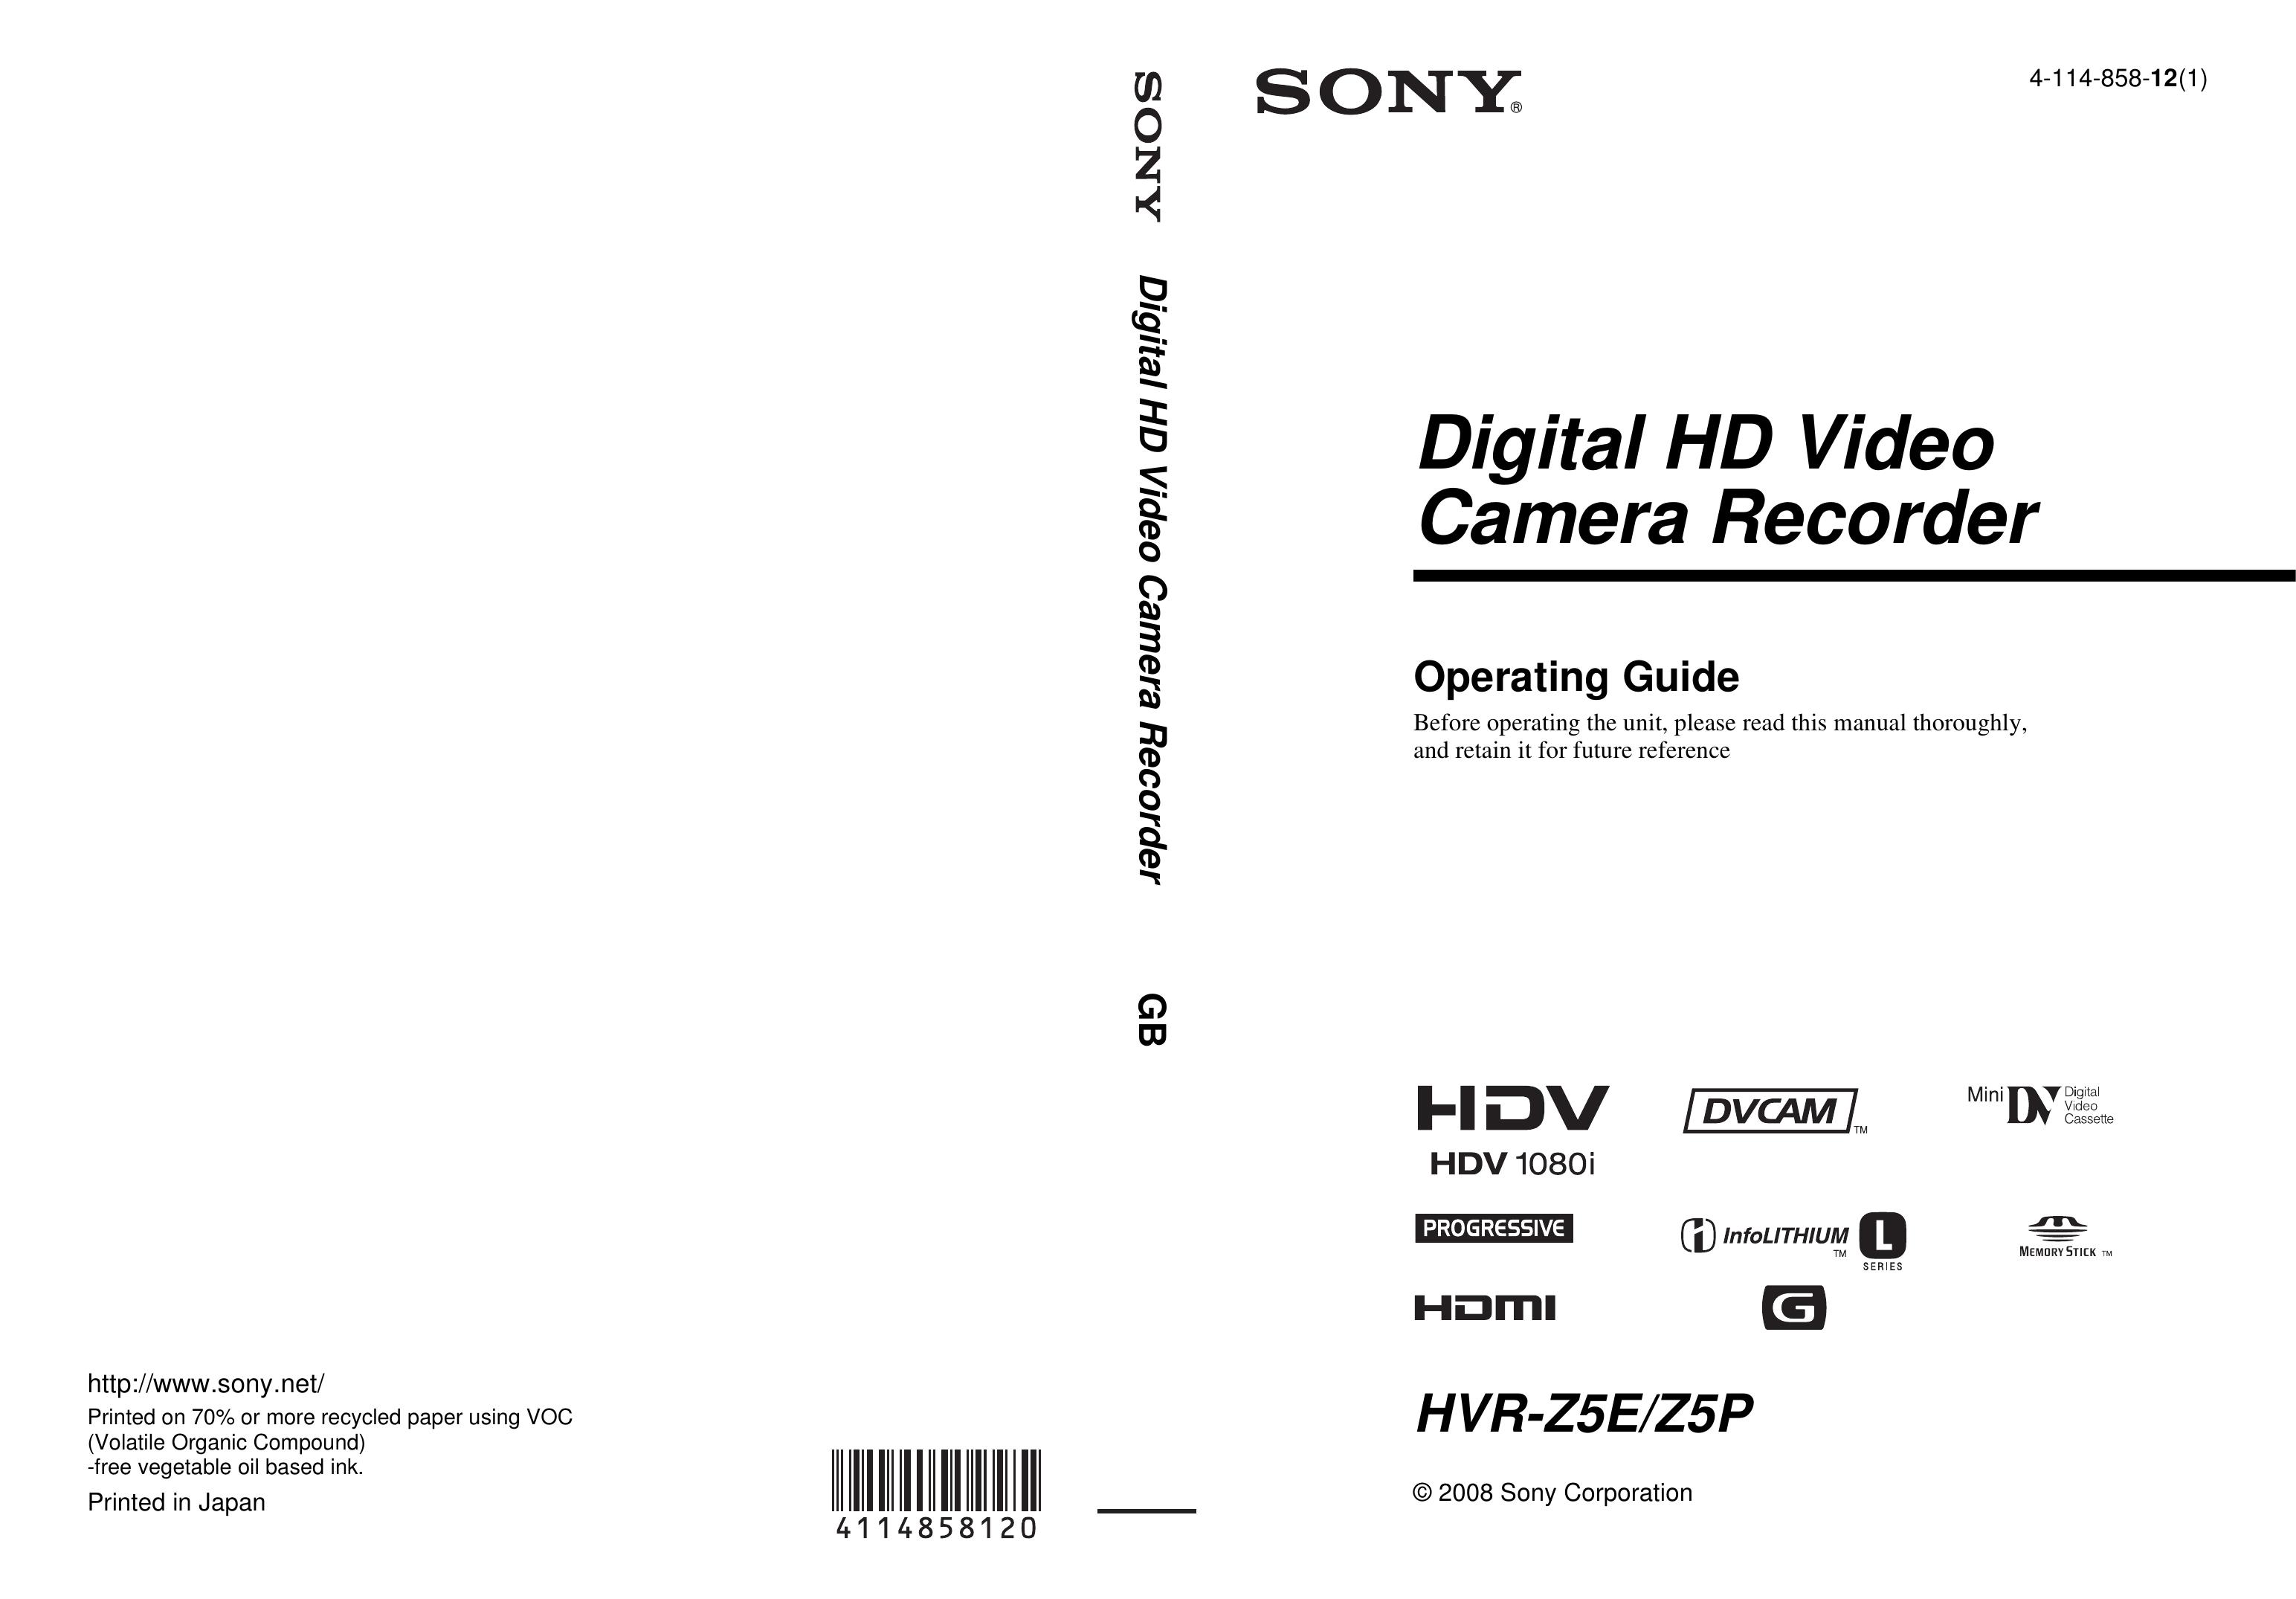 Sony 4-114-858-12(1) Camcorder User Manual